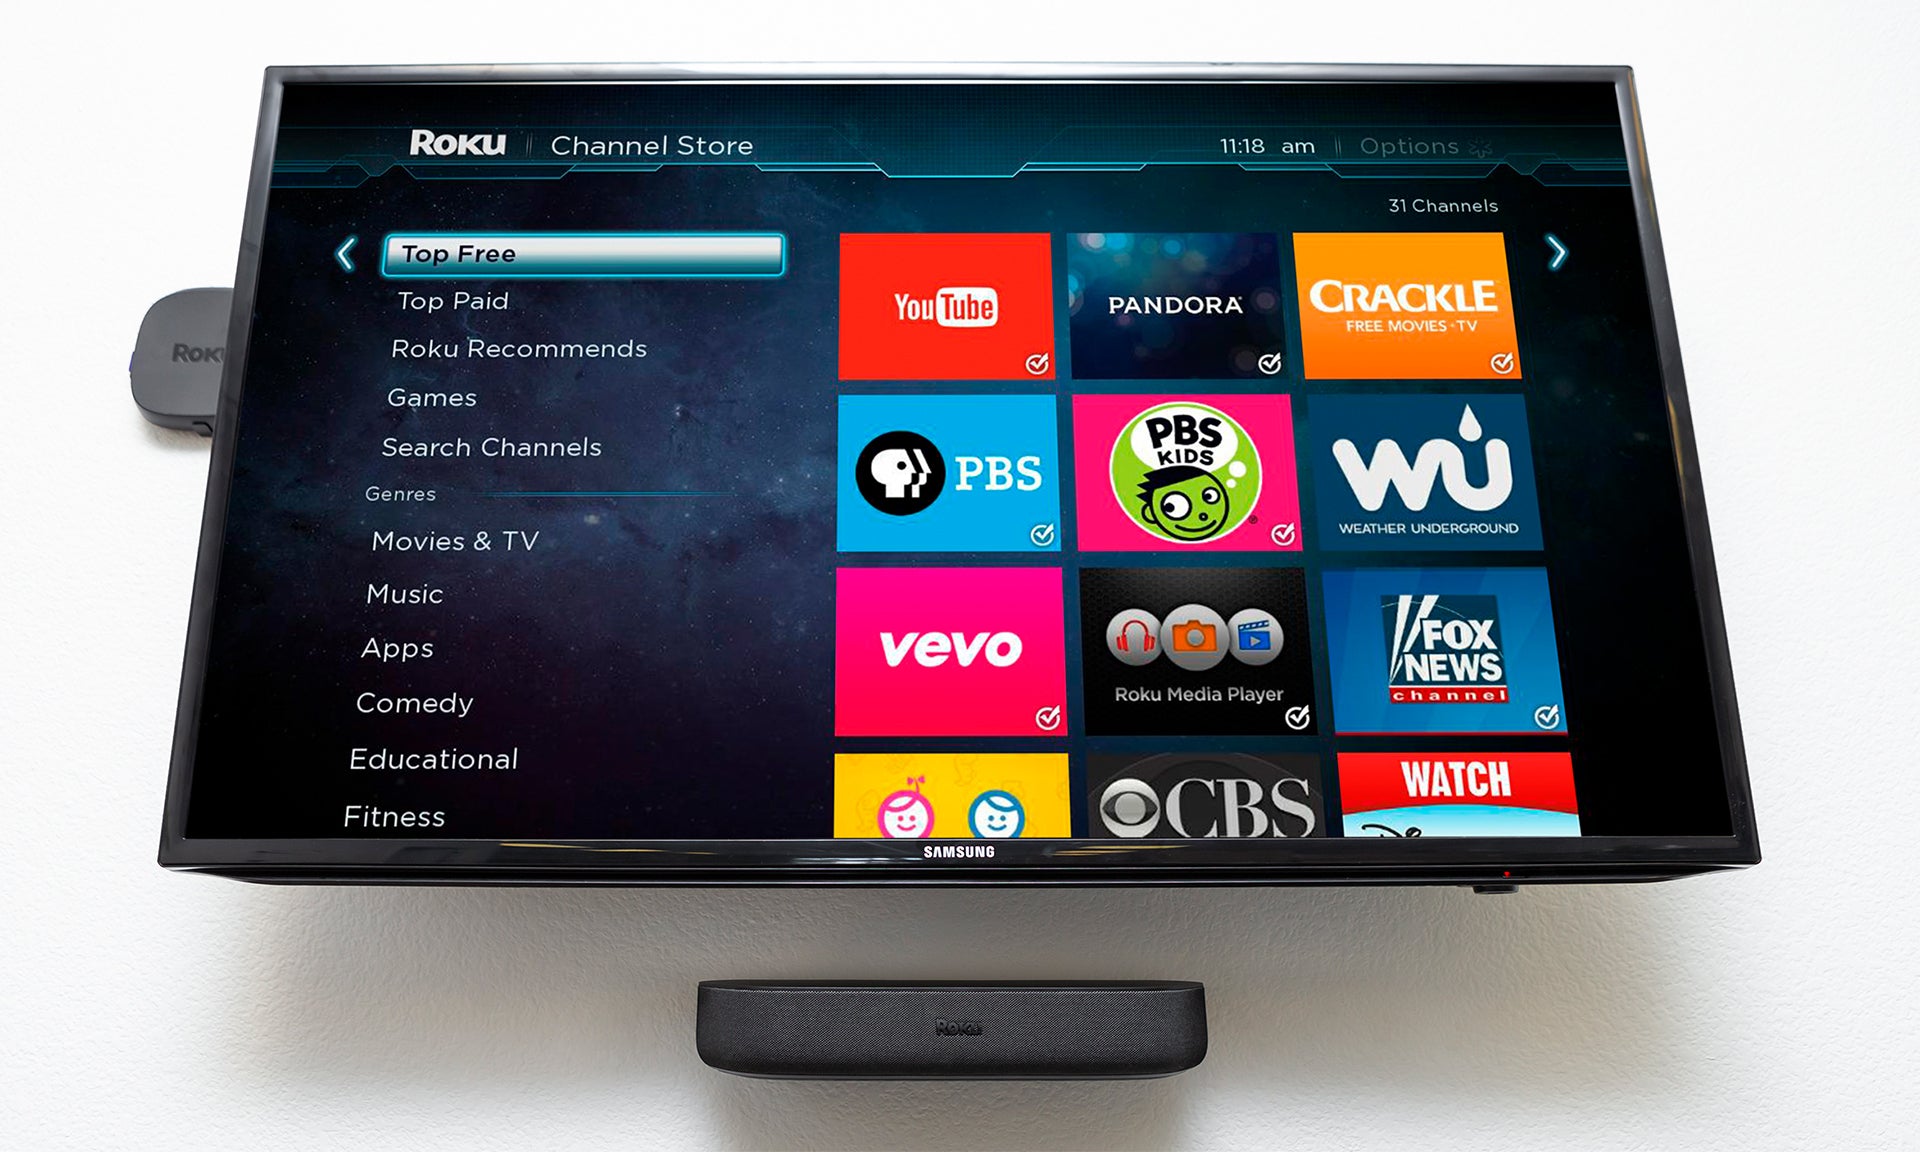 5 Easy Tips to Get the Most Out of Your Roku Ultra + Streambar